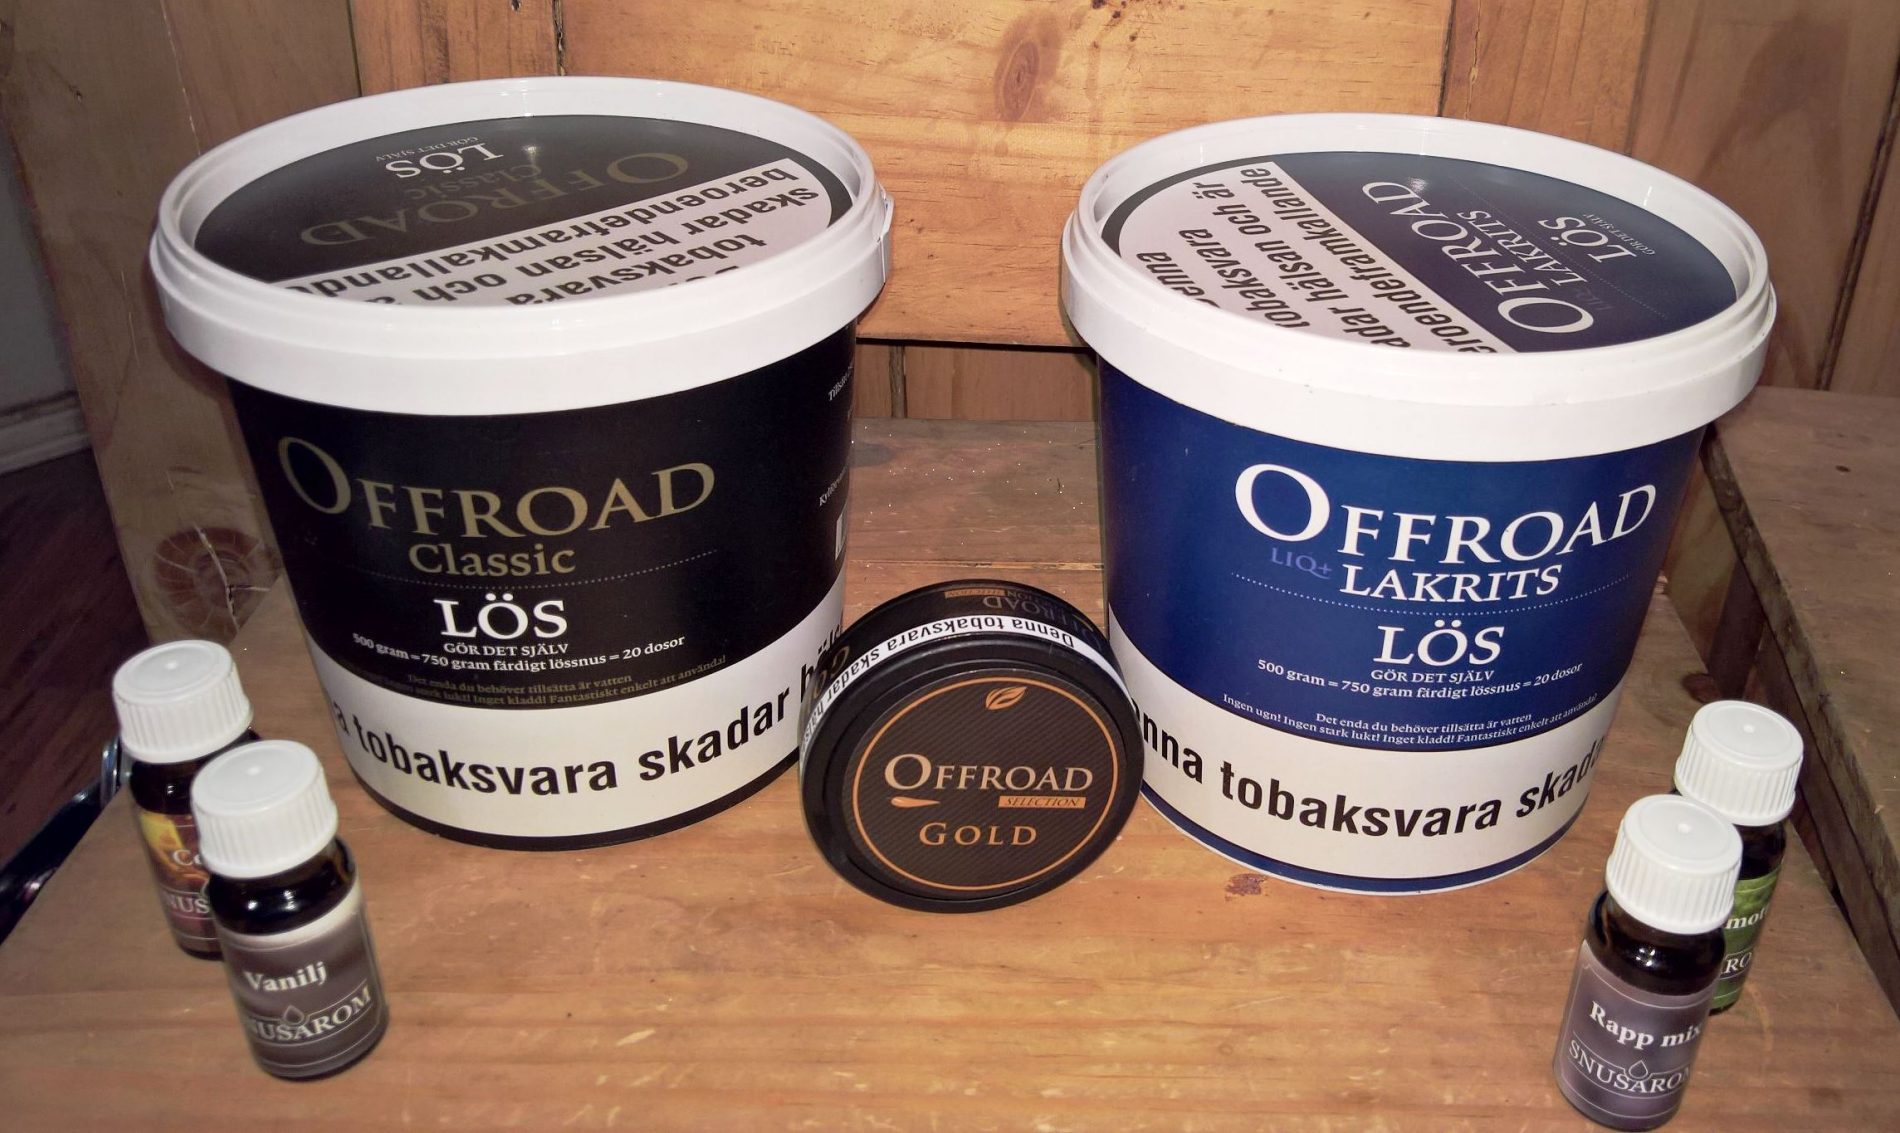 Ultimate Snus Survival Kit for the Nuclear or Zombie Apocalypse